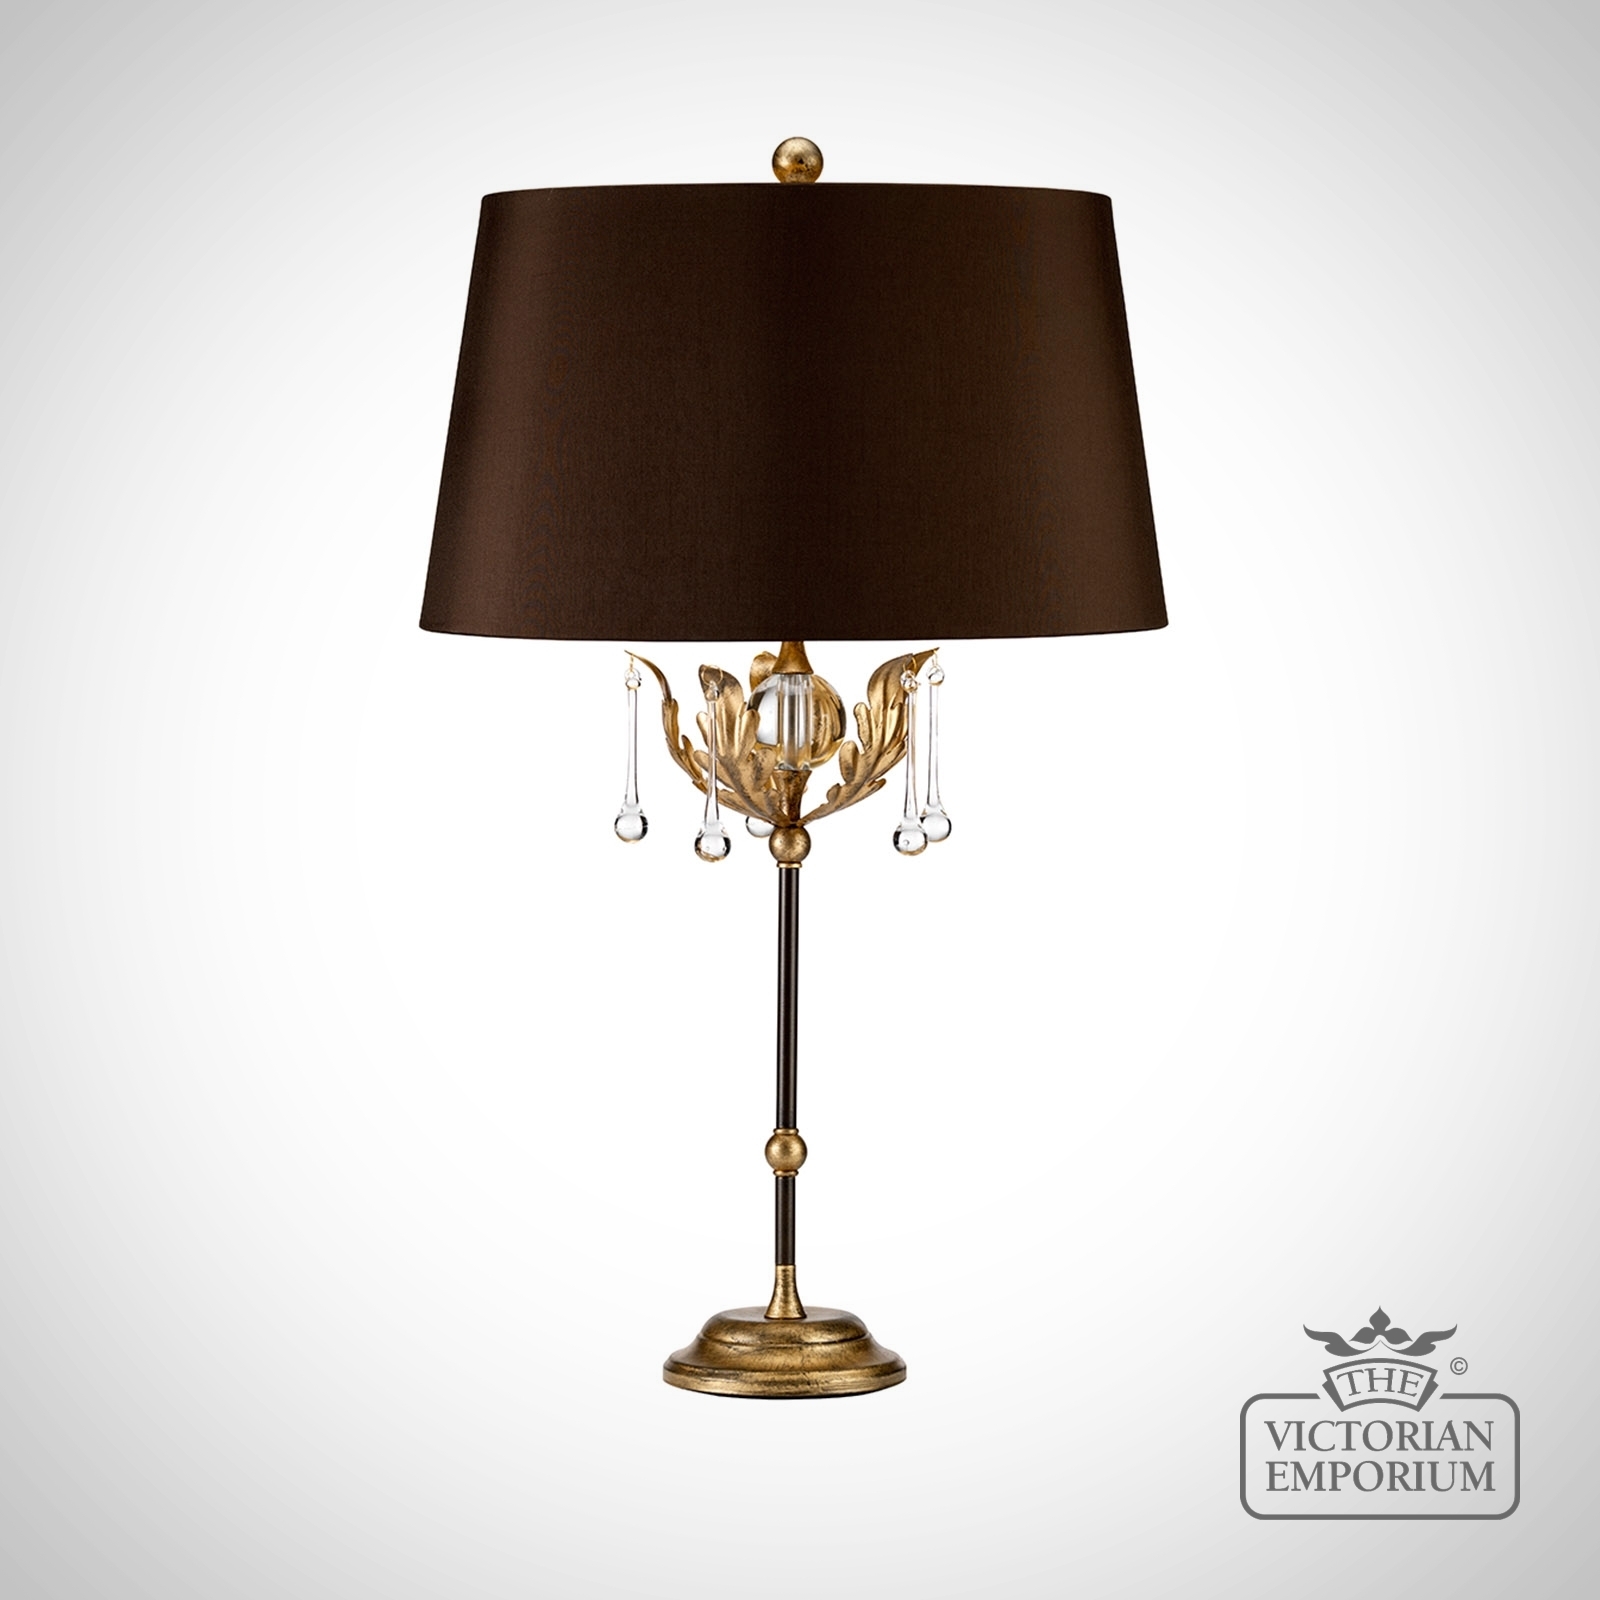 Amarrilli table lamp in gold or silver